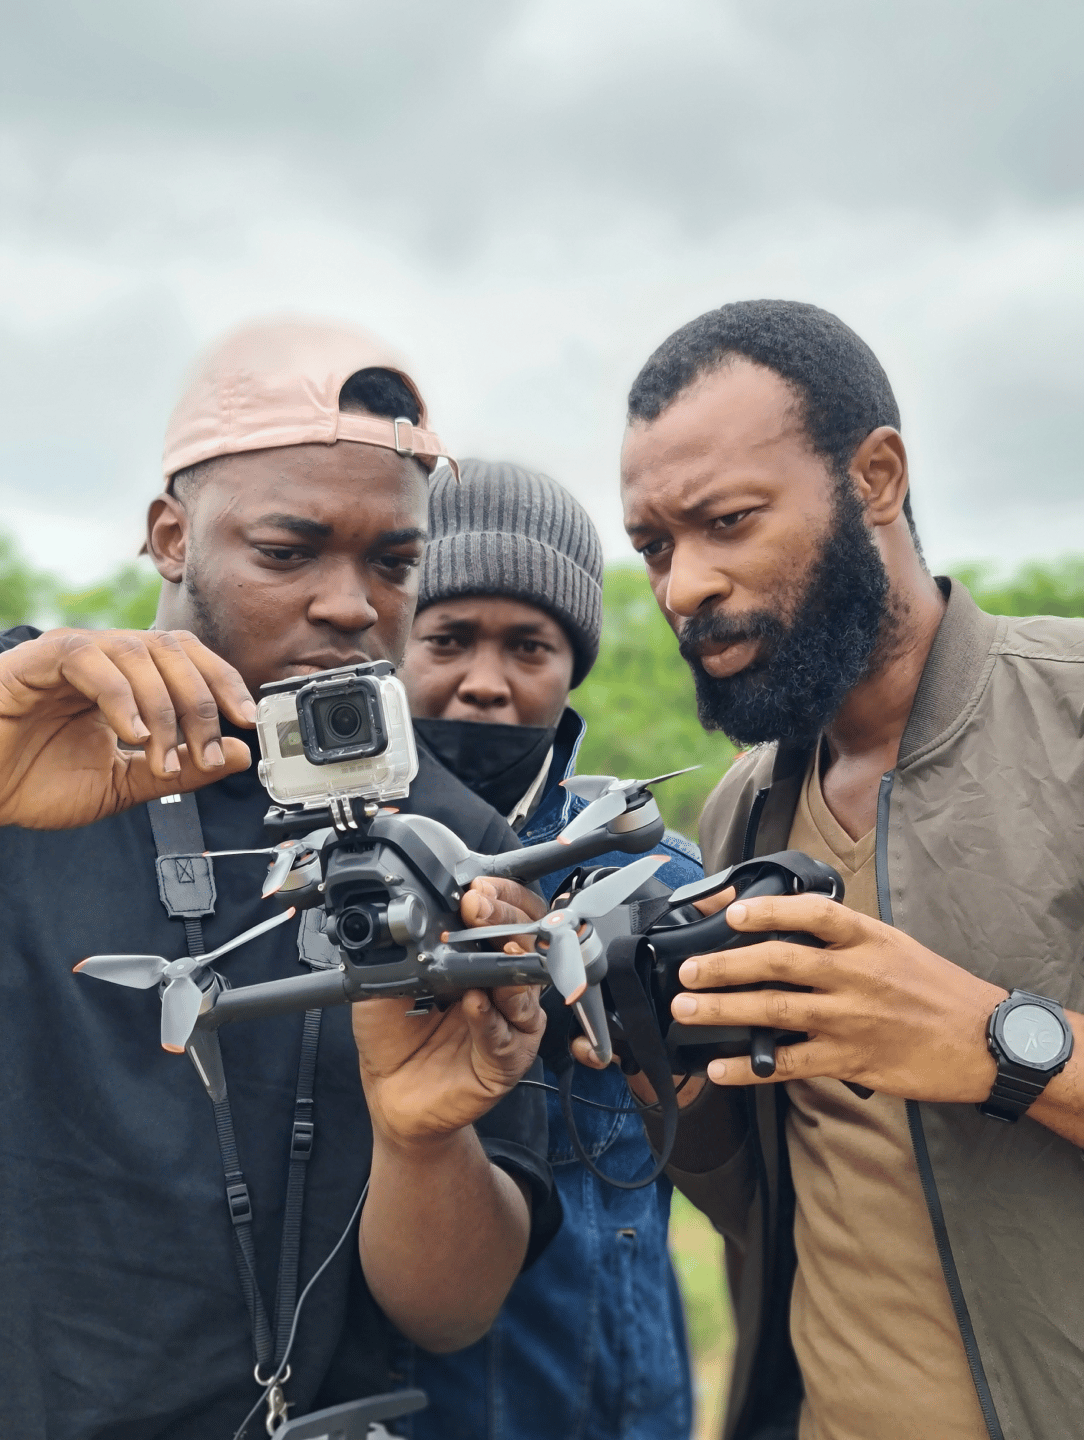 Group of three men holding a drone with a small, portable camera on it.